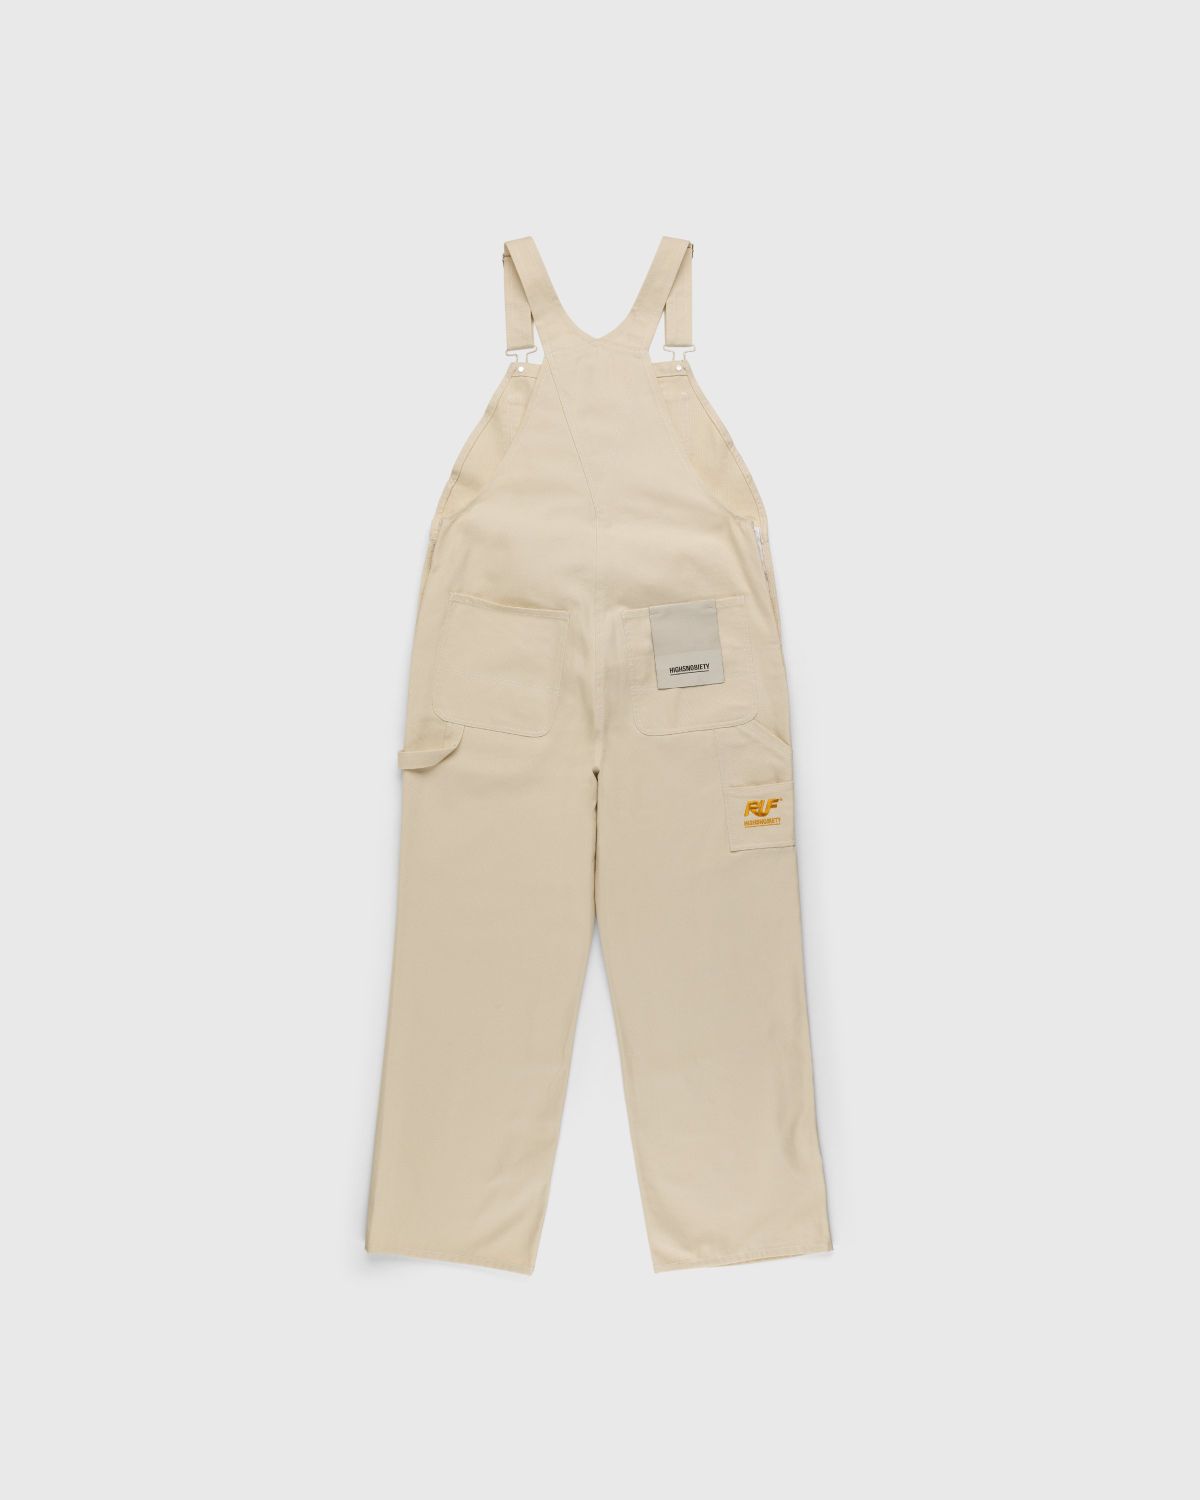 RUF x Highsnobiety – Cotton Overalls Natural - Pants - Beige - Image 1